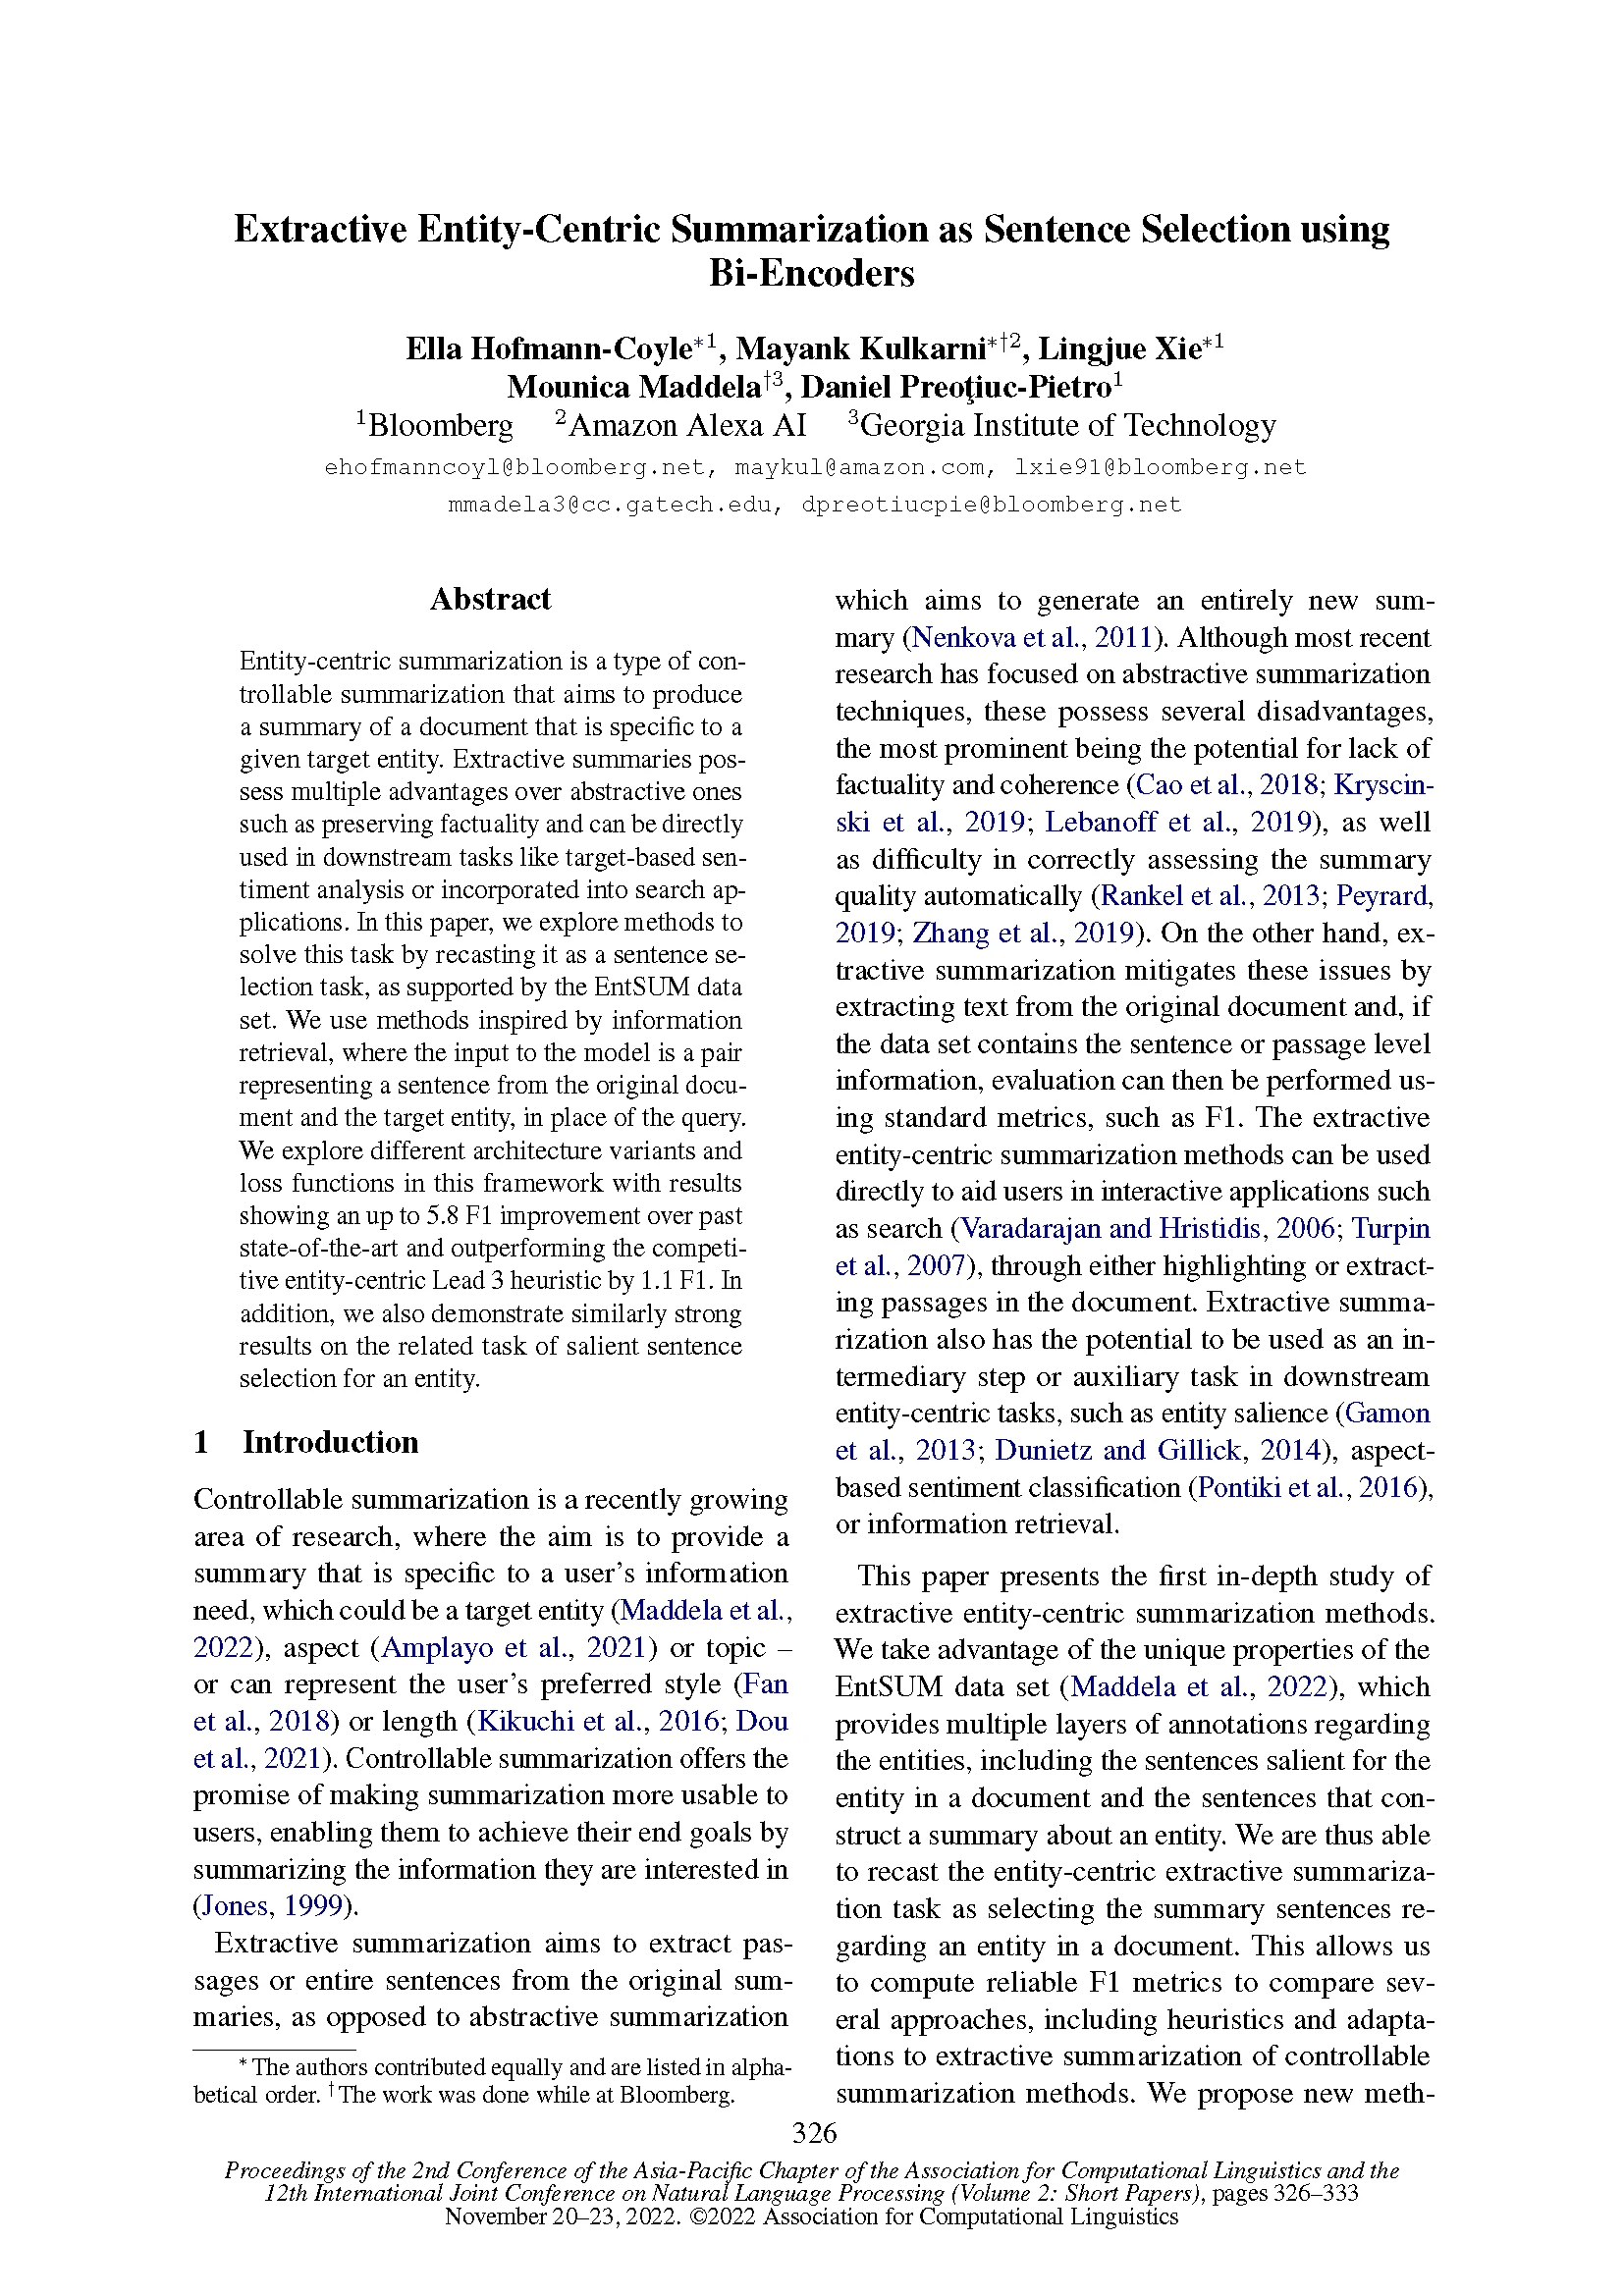 Front page of paper published at AACL-IJCNLP 2022 titled "Extractive Entity-Centric Summarization as Sentence Selection using Bi-Encoders."